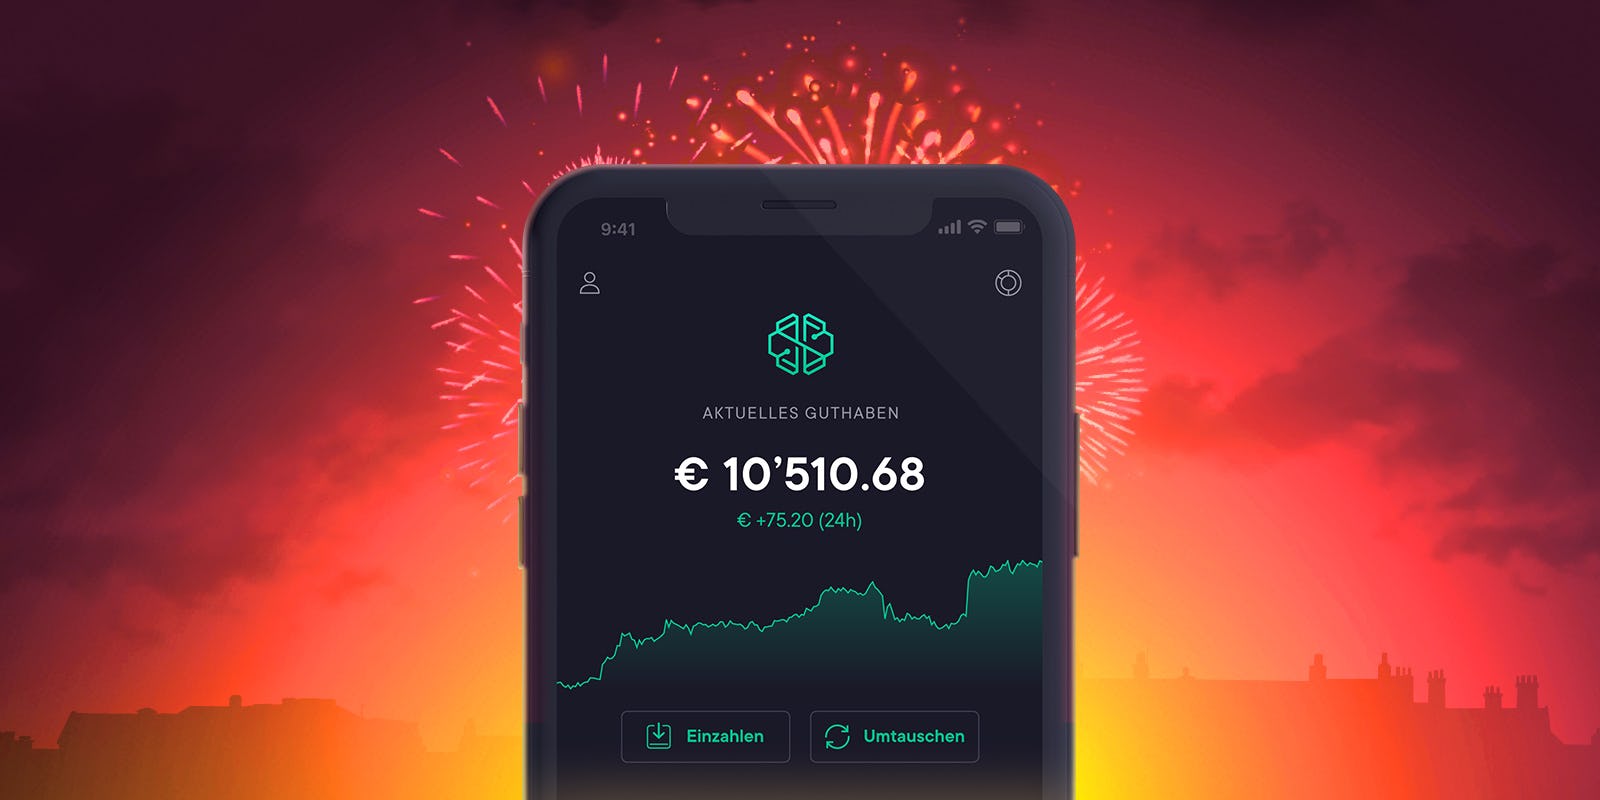 SwissBorg app is now available in German